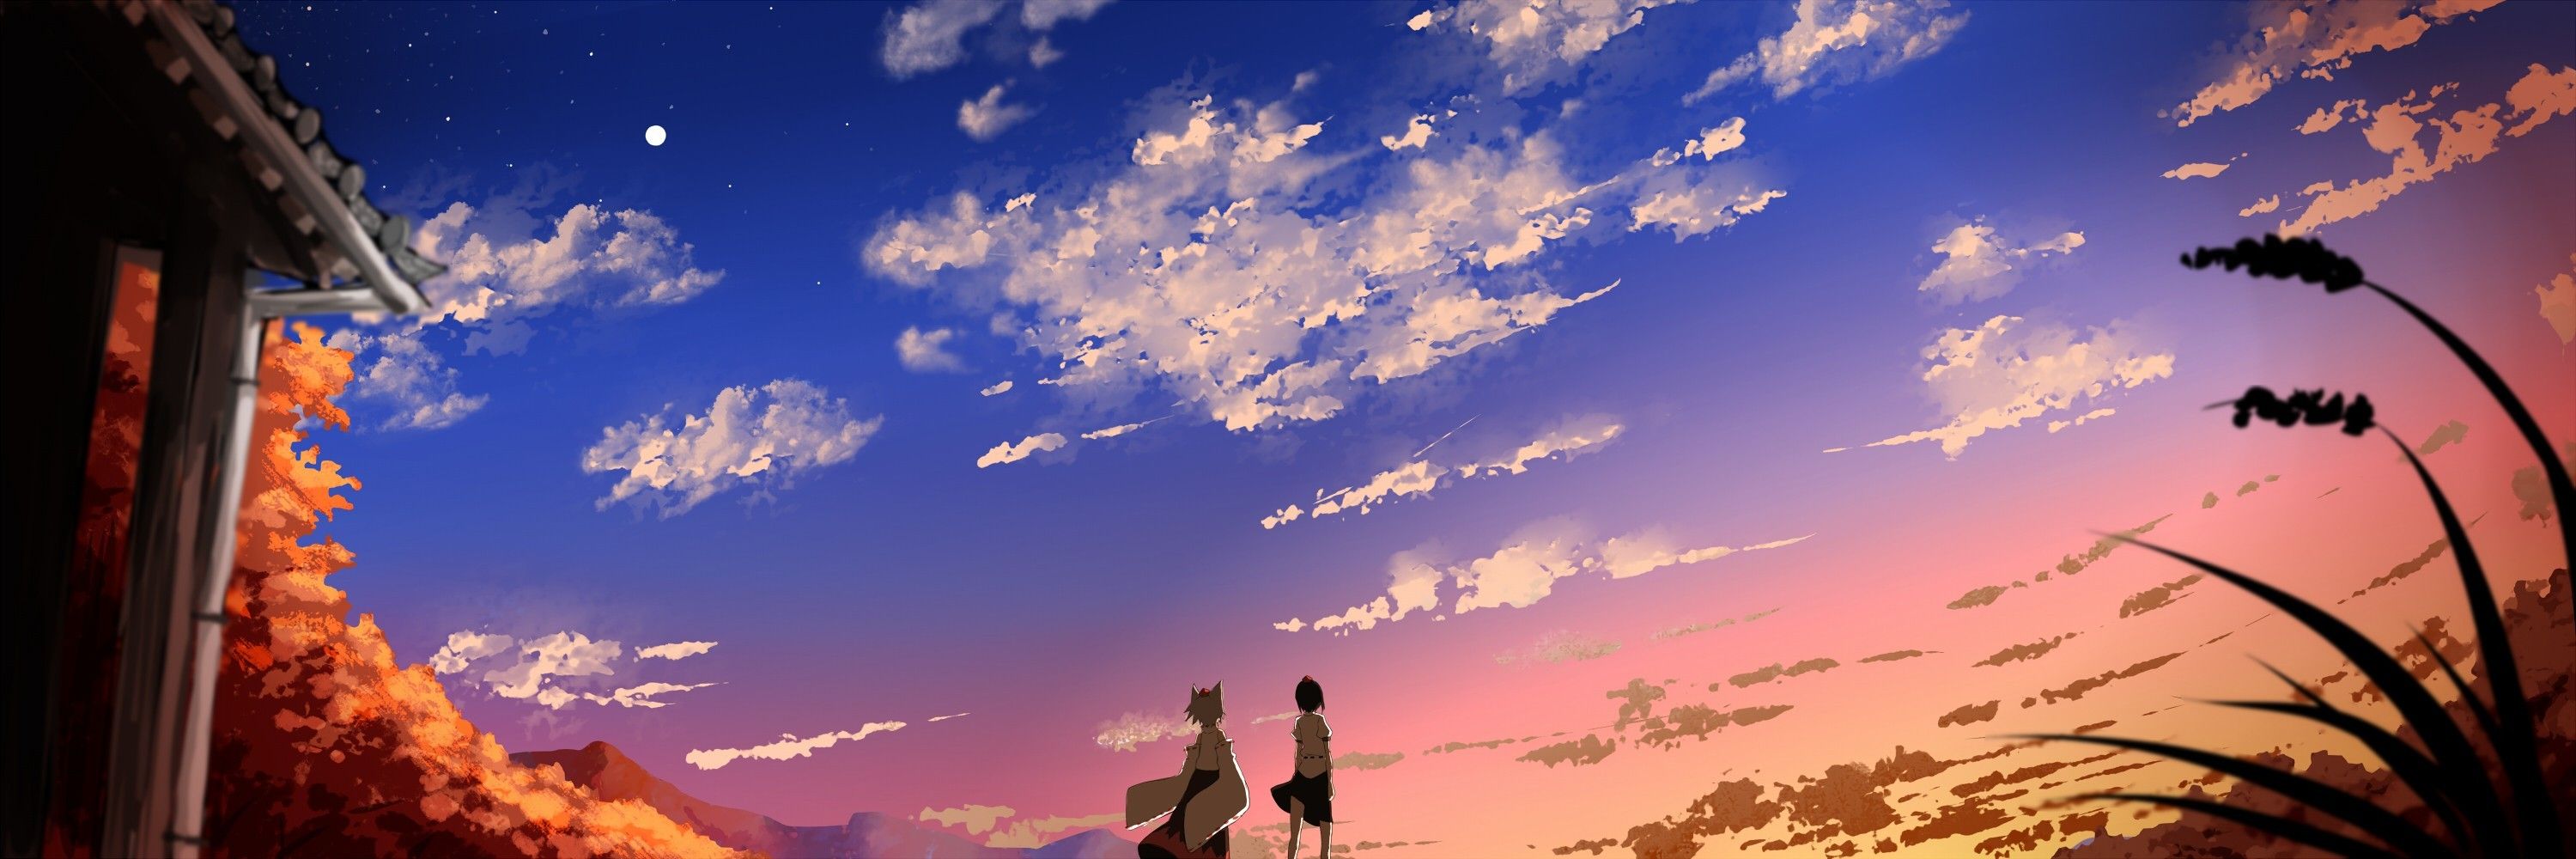 Anime Sunset Wallpapers - Wallpaper Cave